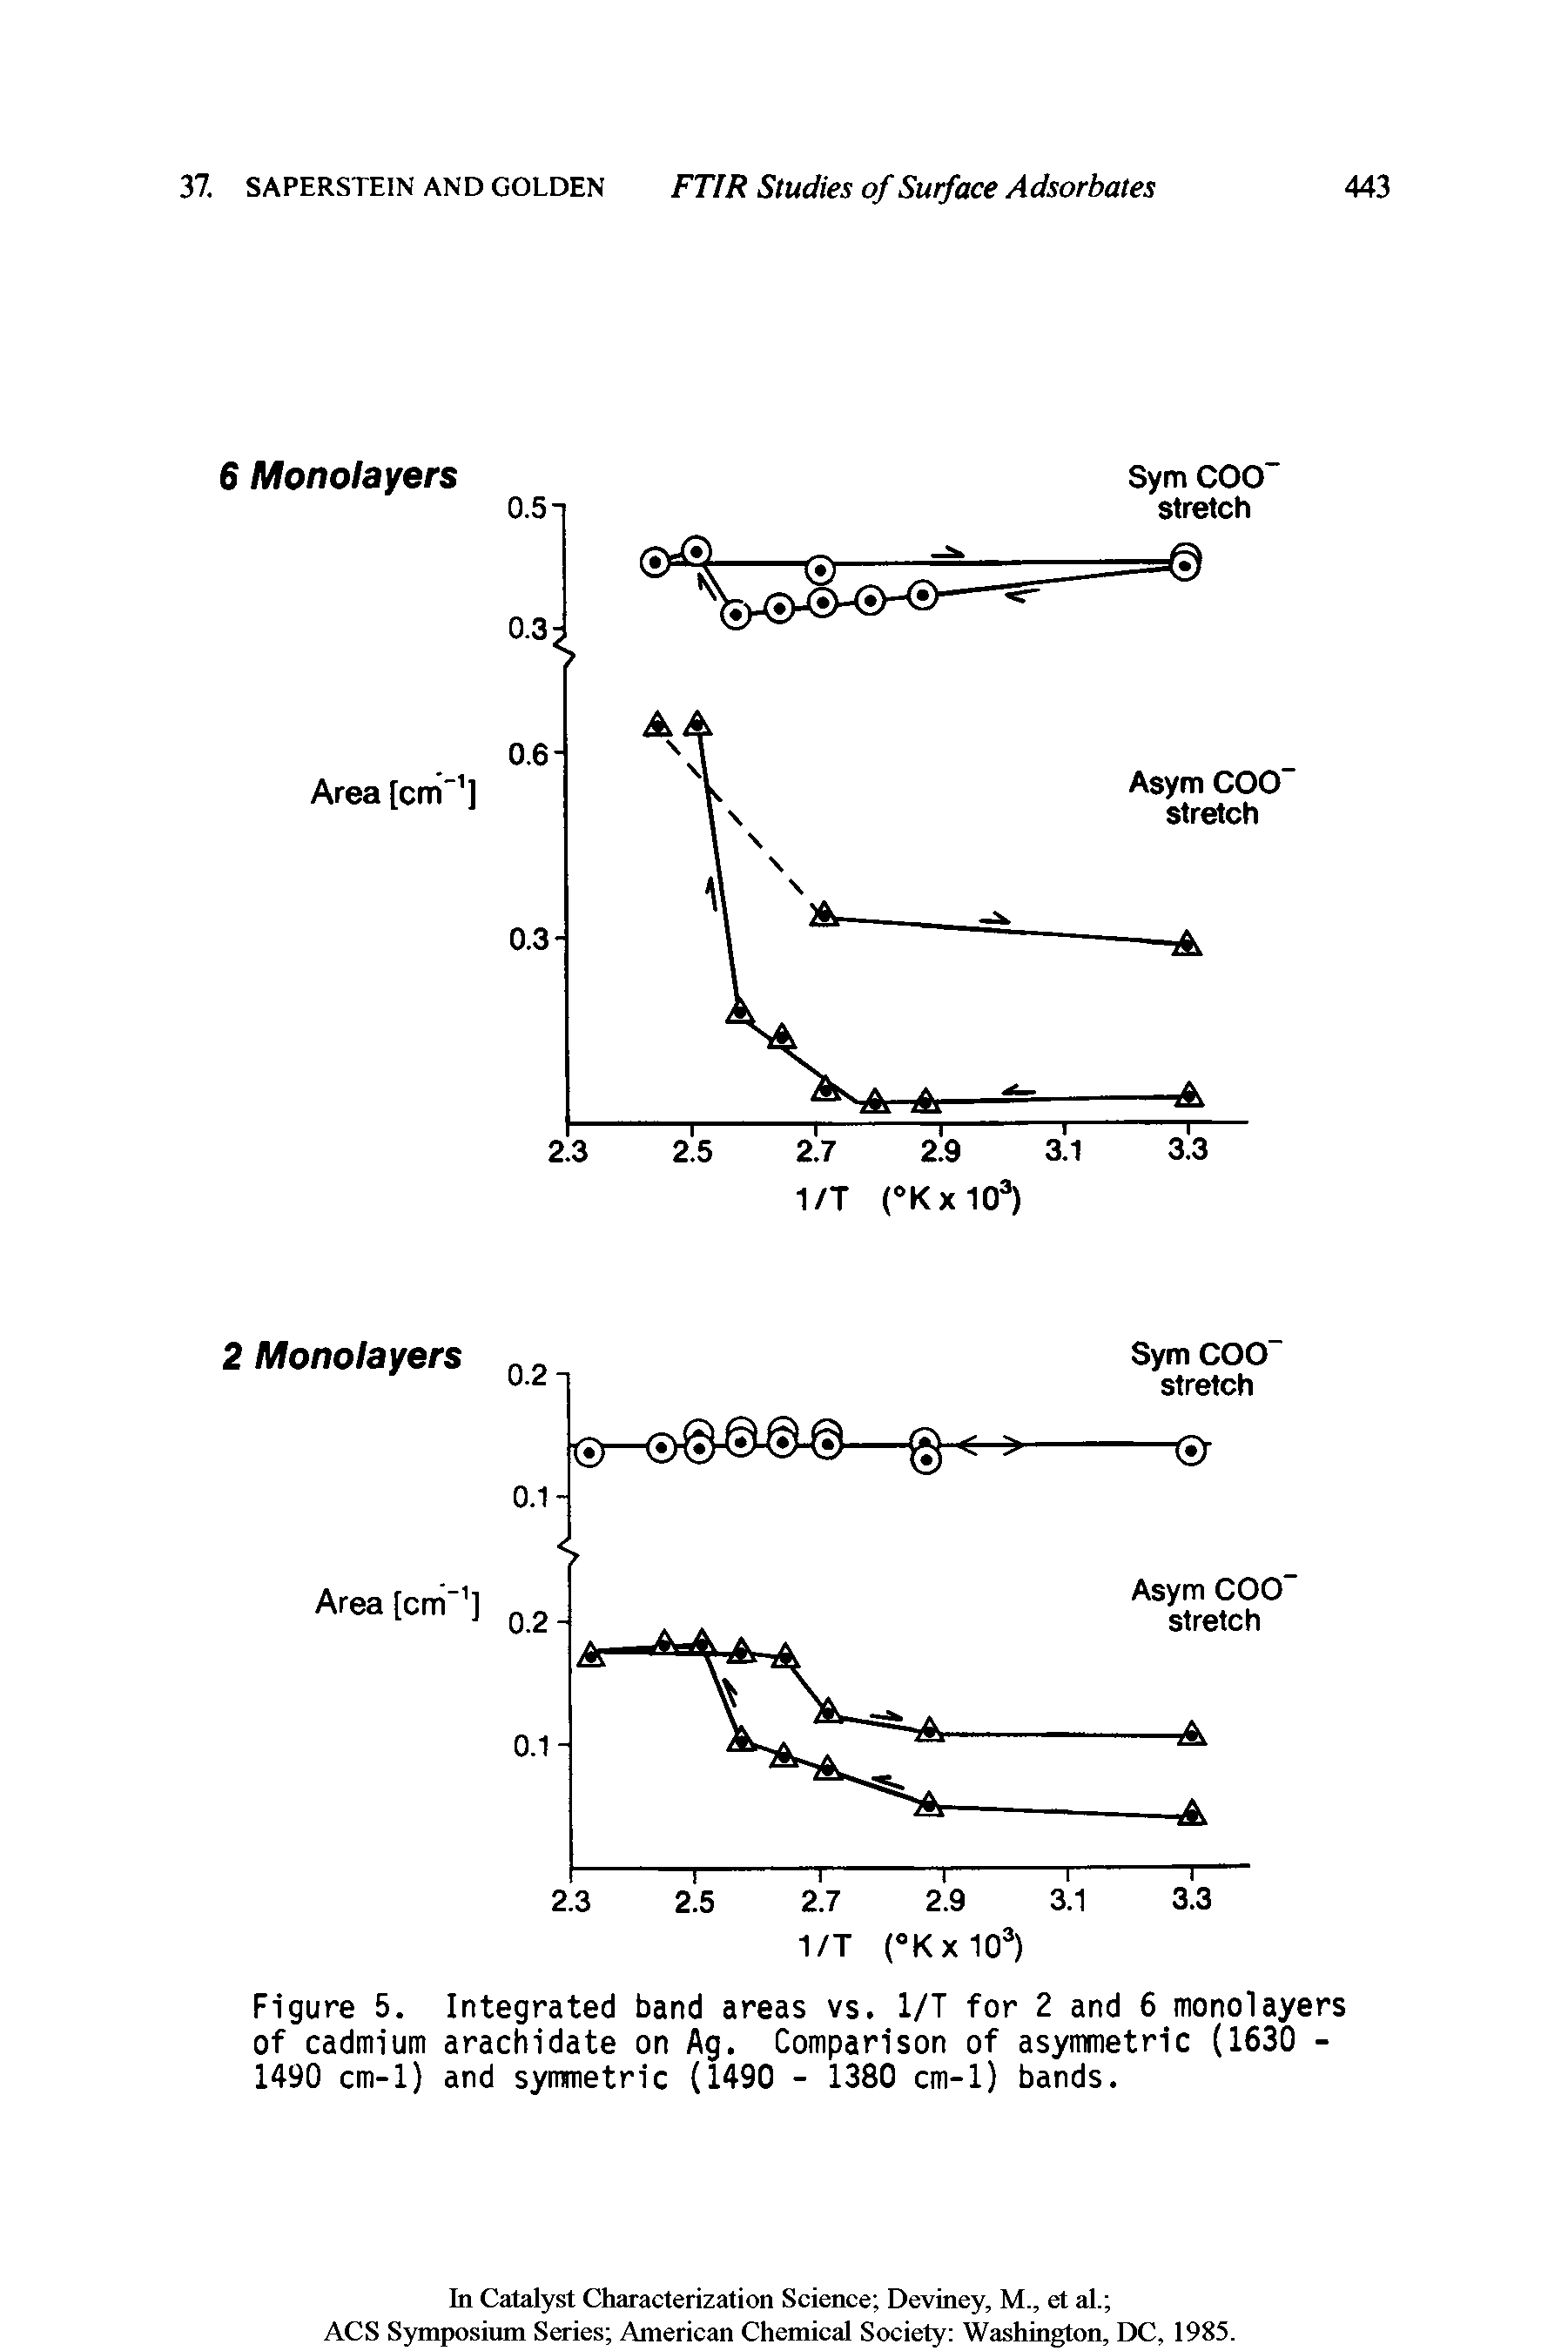 Figure 5. Integrated band areas vs. 1/T for 2 and 6 monolayers of cadmium arachidate on Ag. Comparison of asymmetric (1630 -1490 cm-1) and symmetric (1490 - 1380 cm-1) bands.